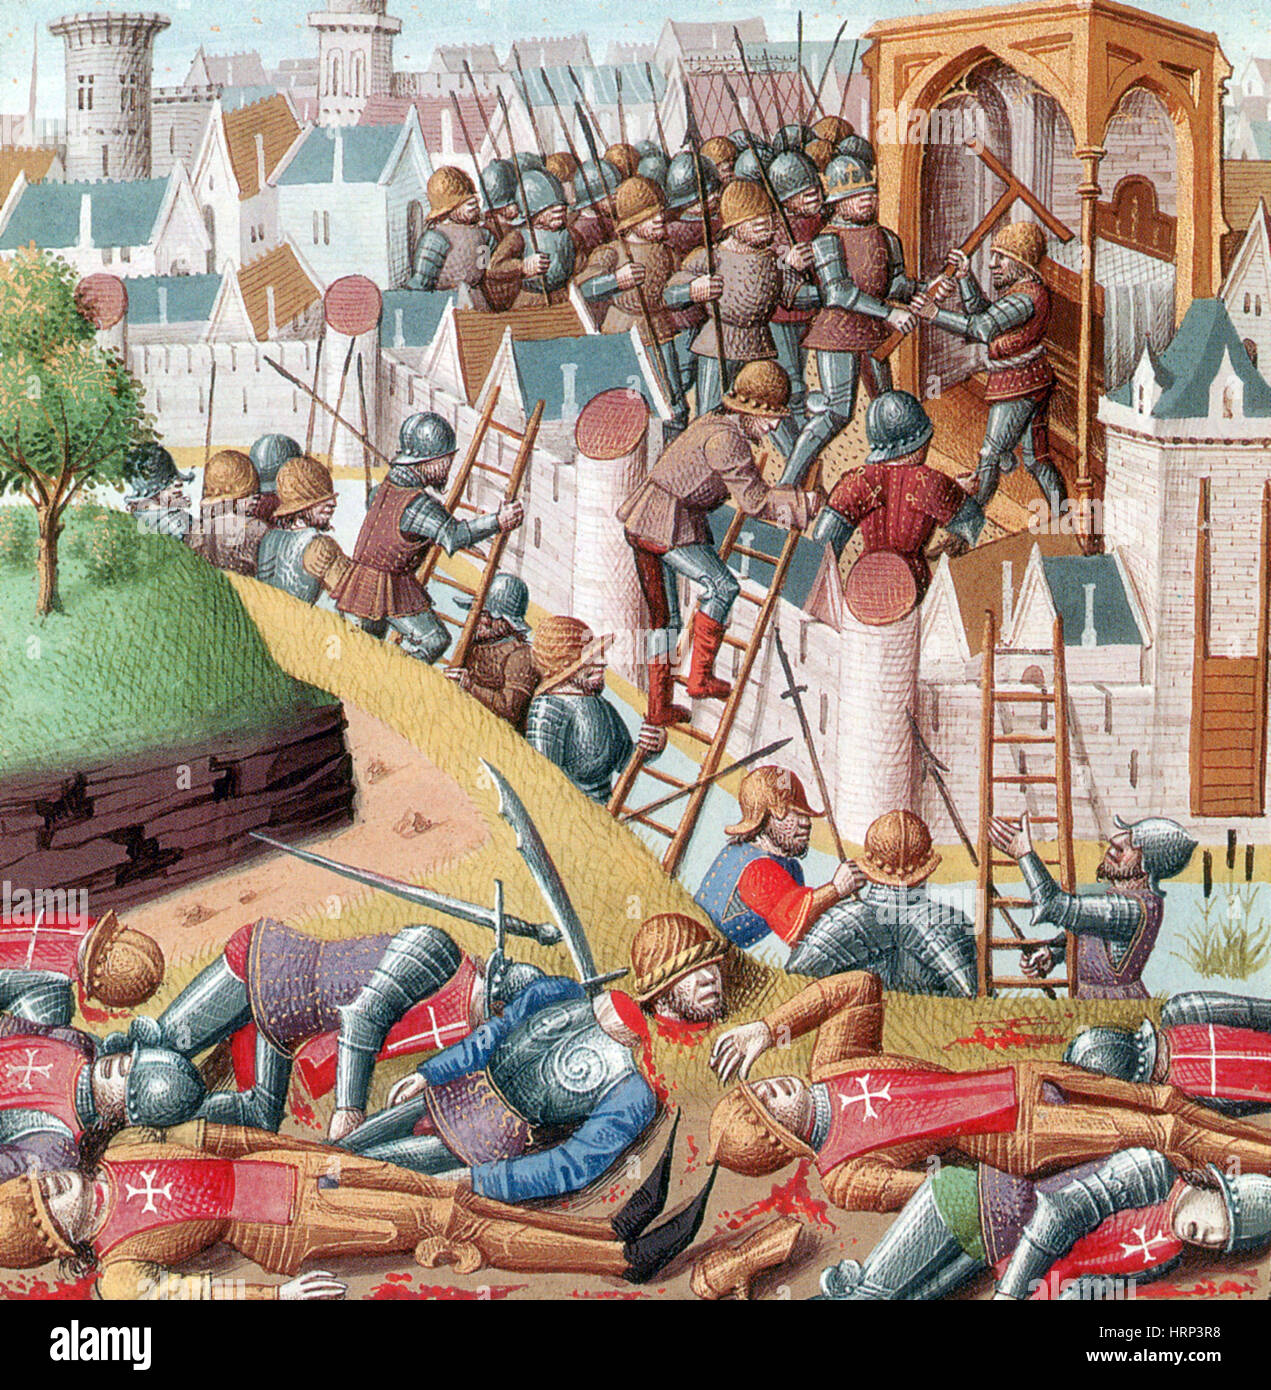 Image of The town of Saint Jean d'Acre is captured in 1291